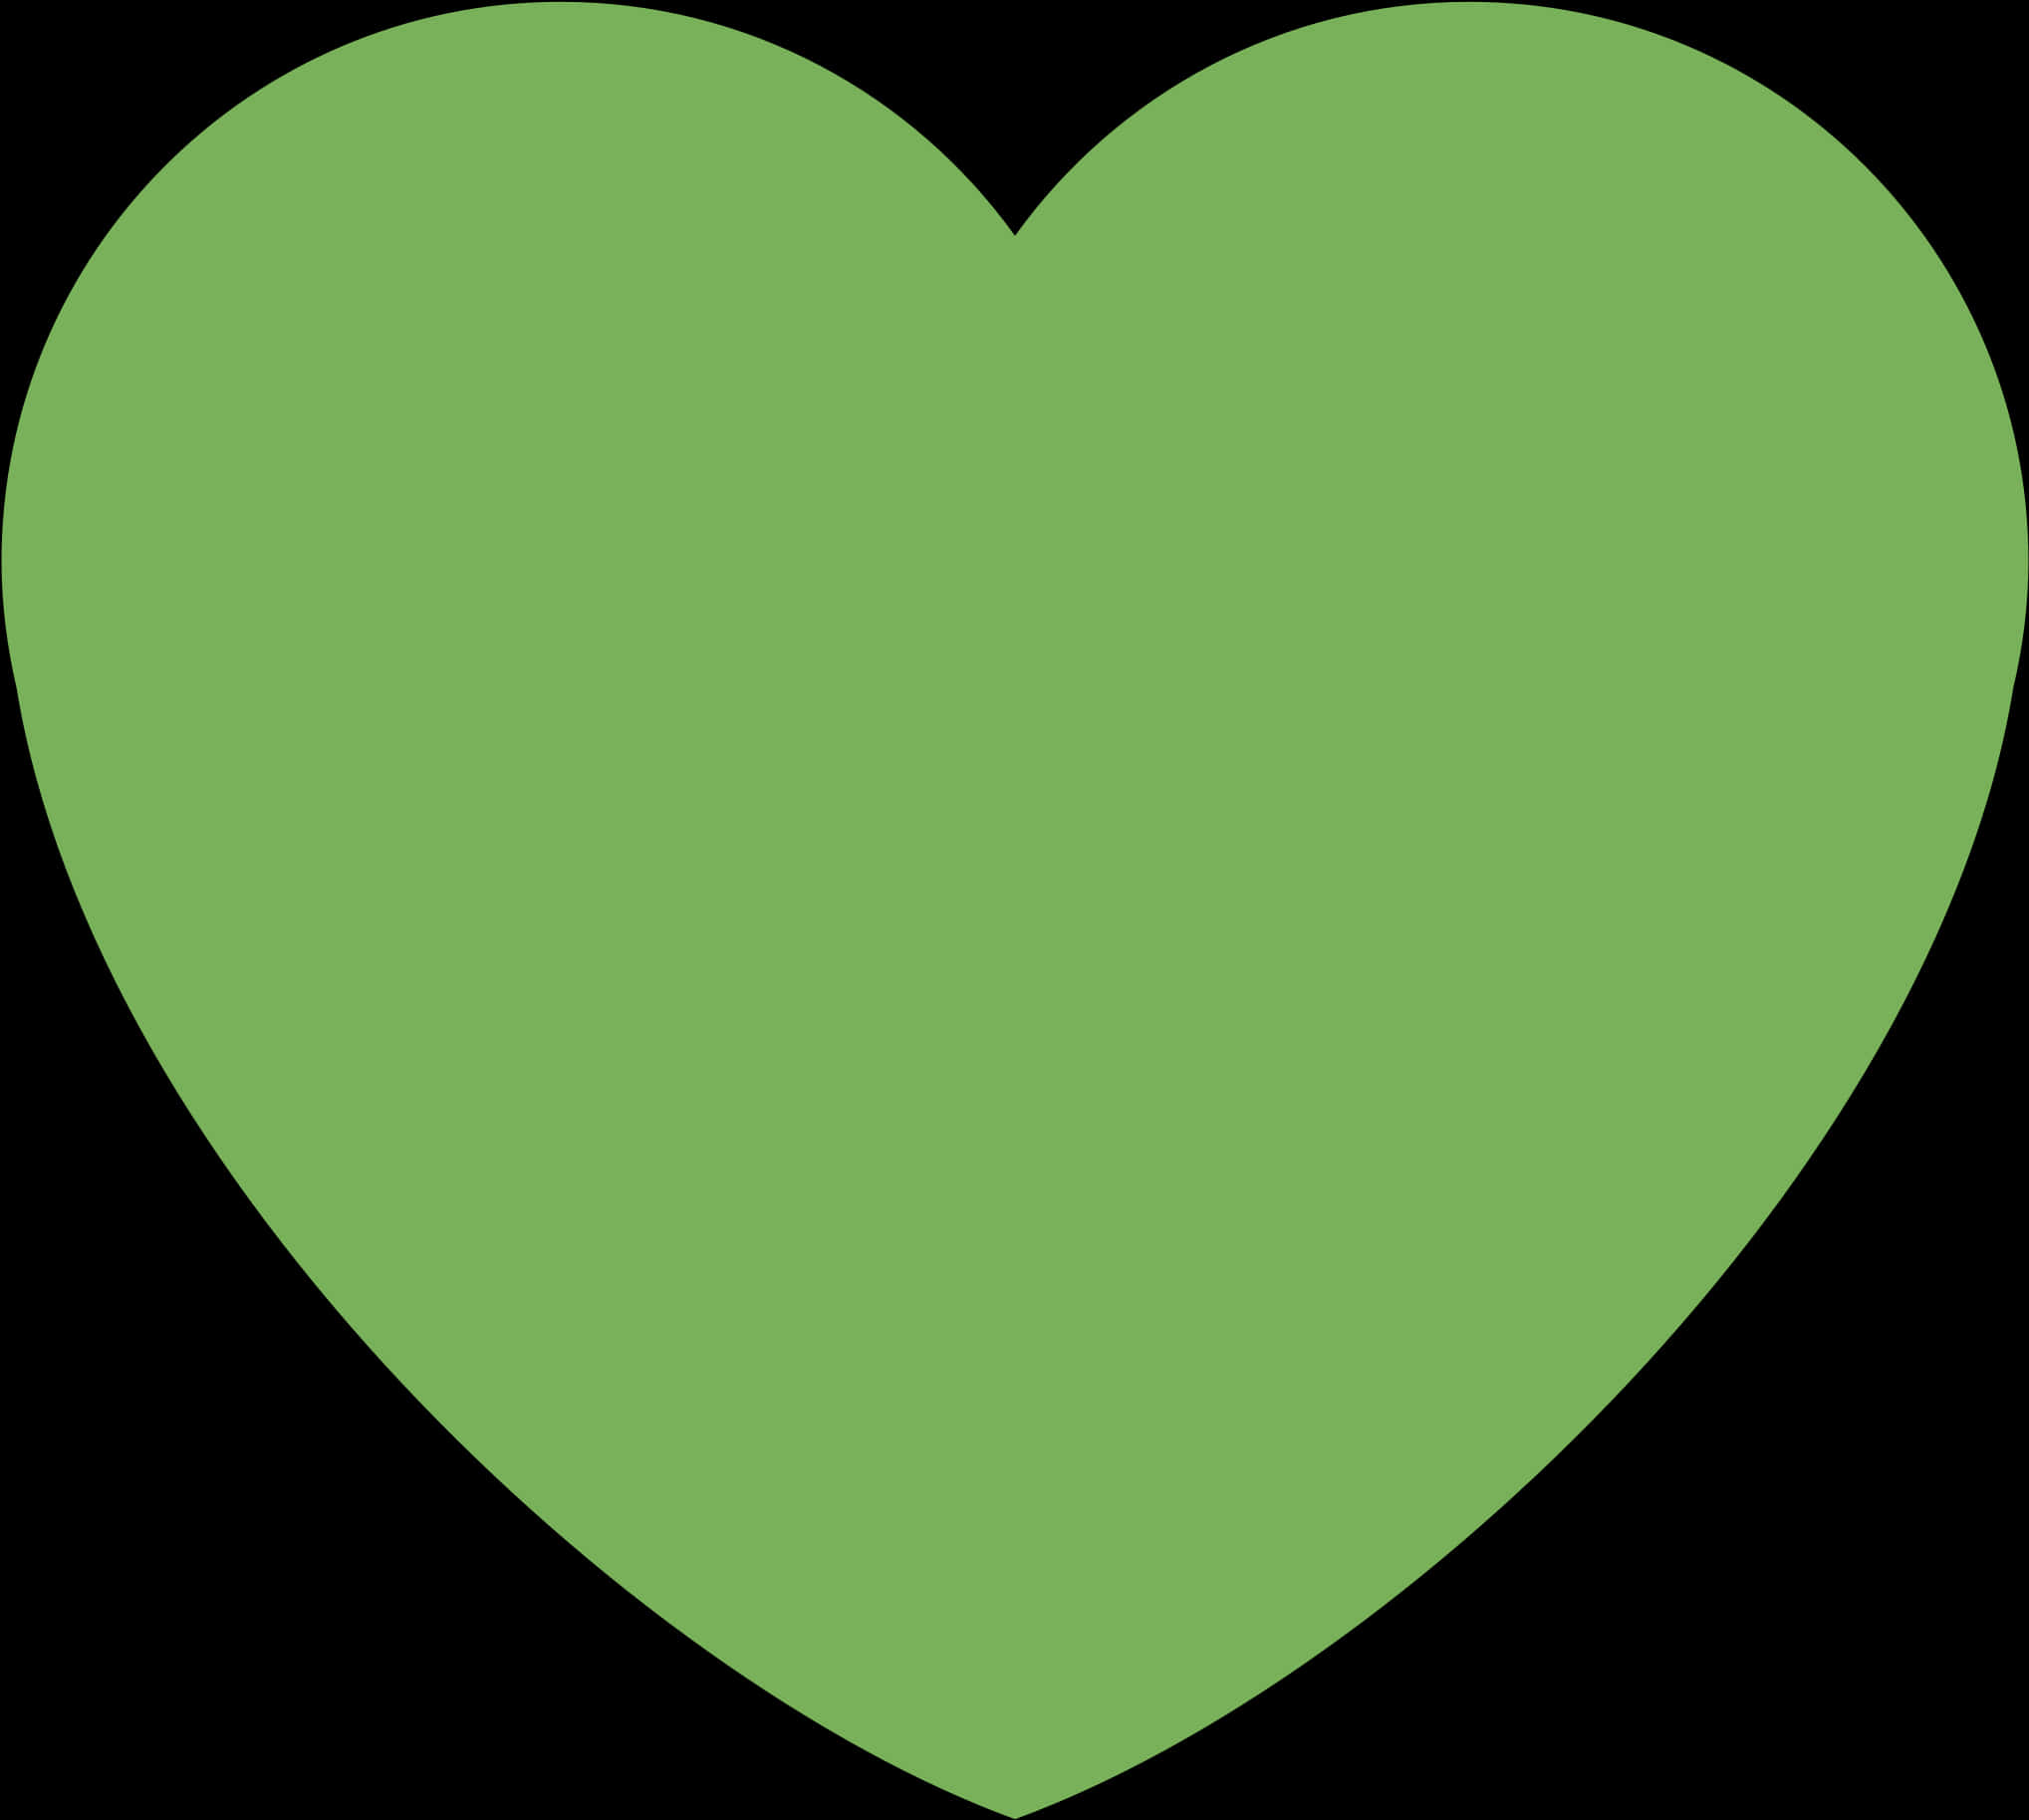 Green Heart Images With Transparent Background